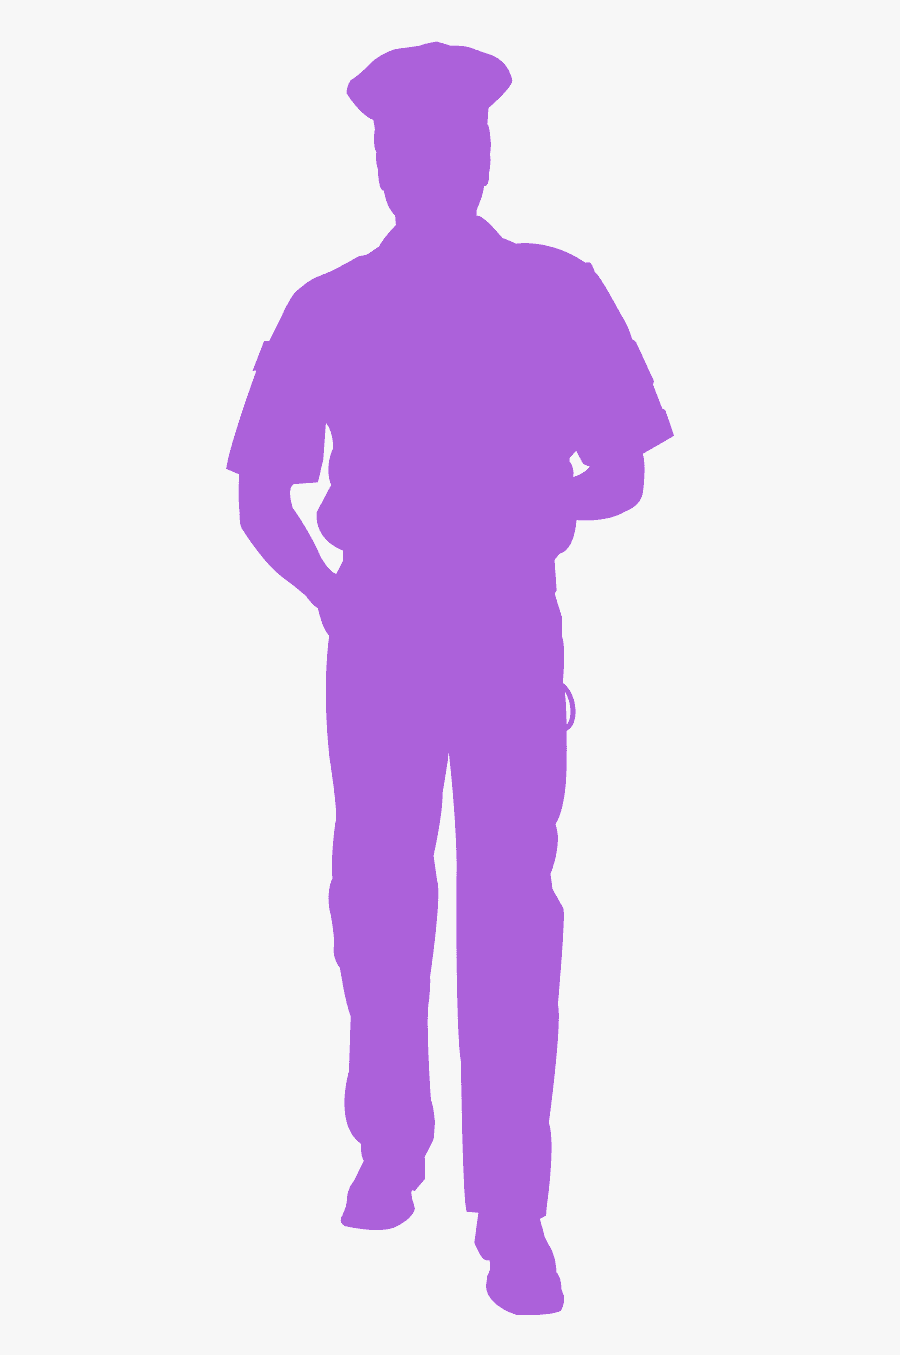 Free Police Office Silhouette, Transparent Clipart